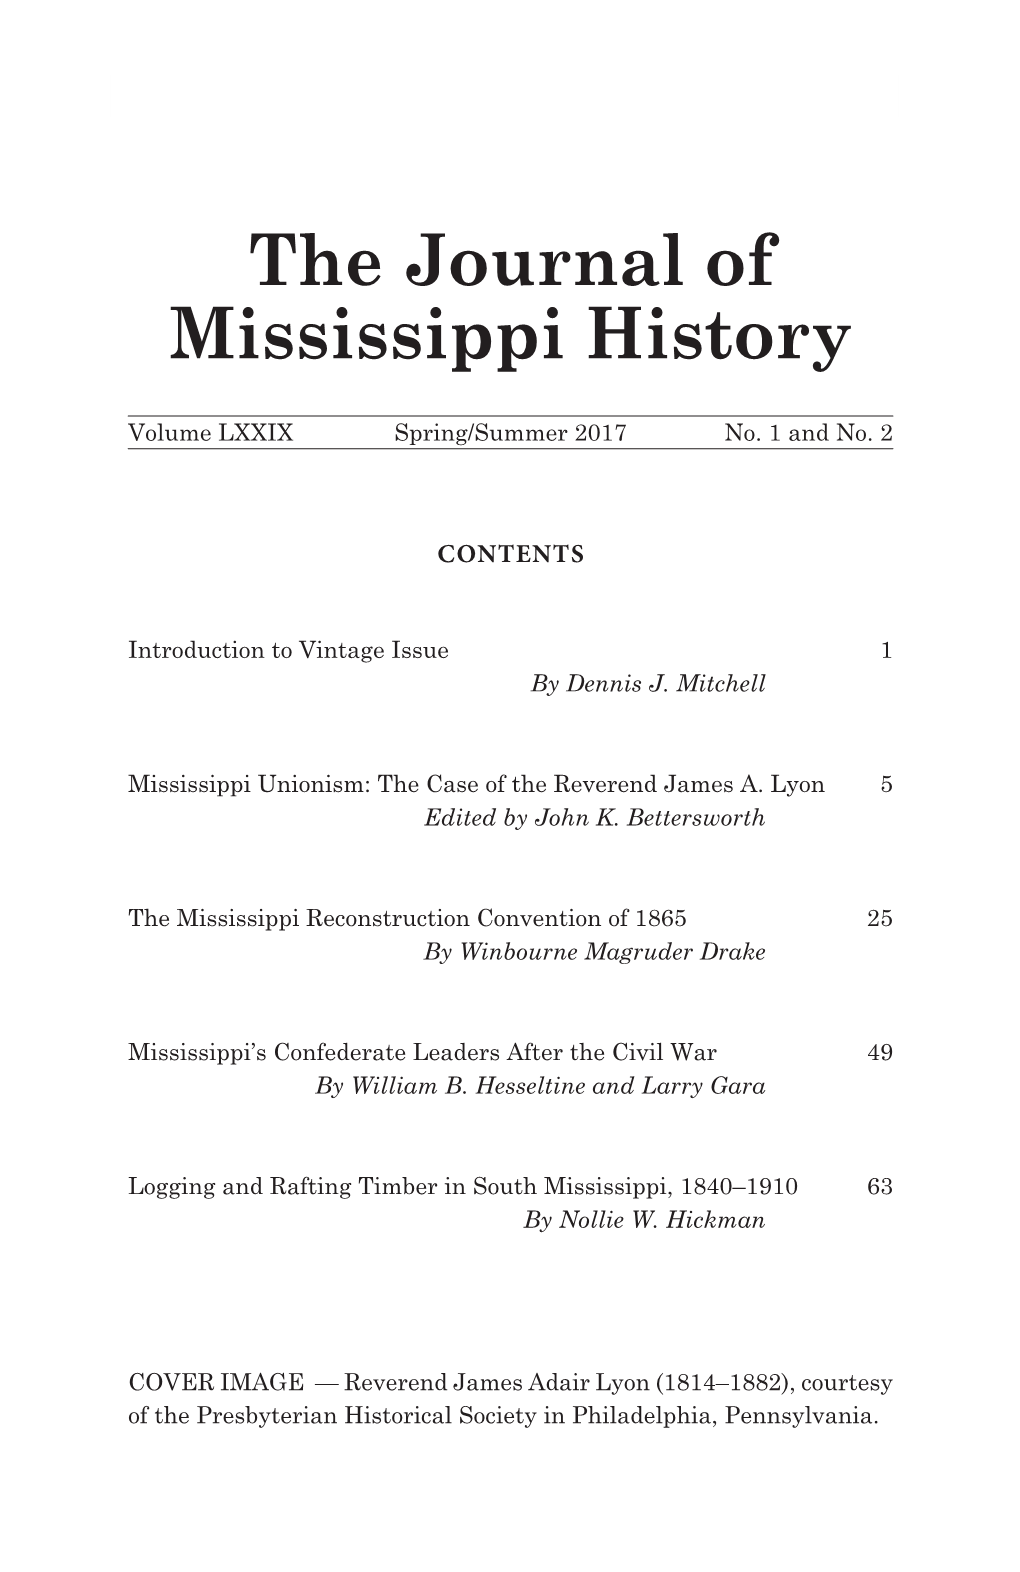 The Journal of Mississippi History